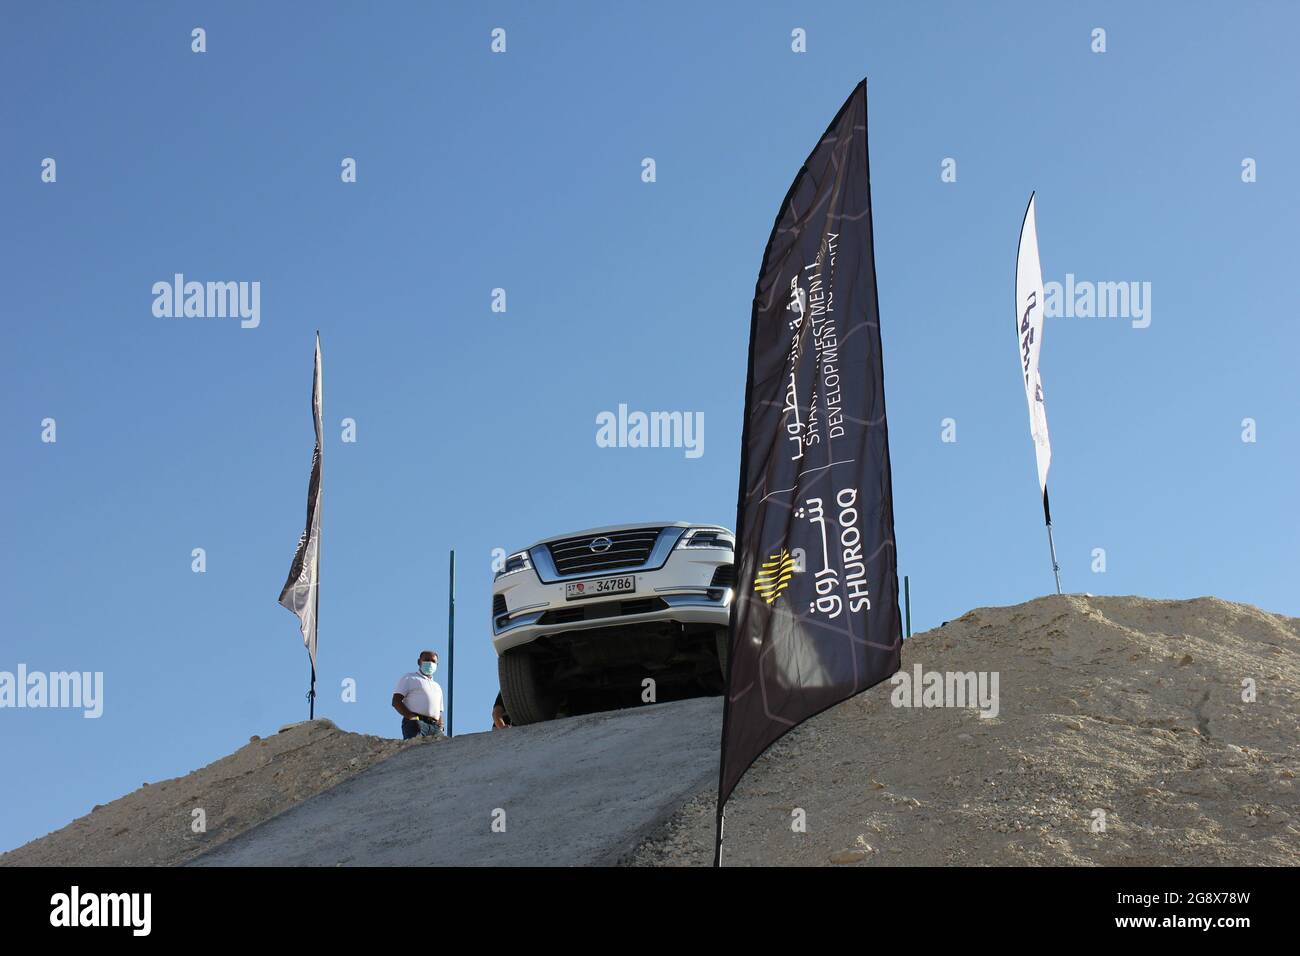 A 4x4 (4-wheel-drive) vehicle at 'XQuarry' Off-Road and Adventure Park located in Mleiha desert in Sharjah emirate, United Arab Emirates. Stock Photo